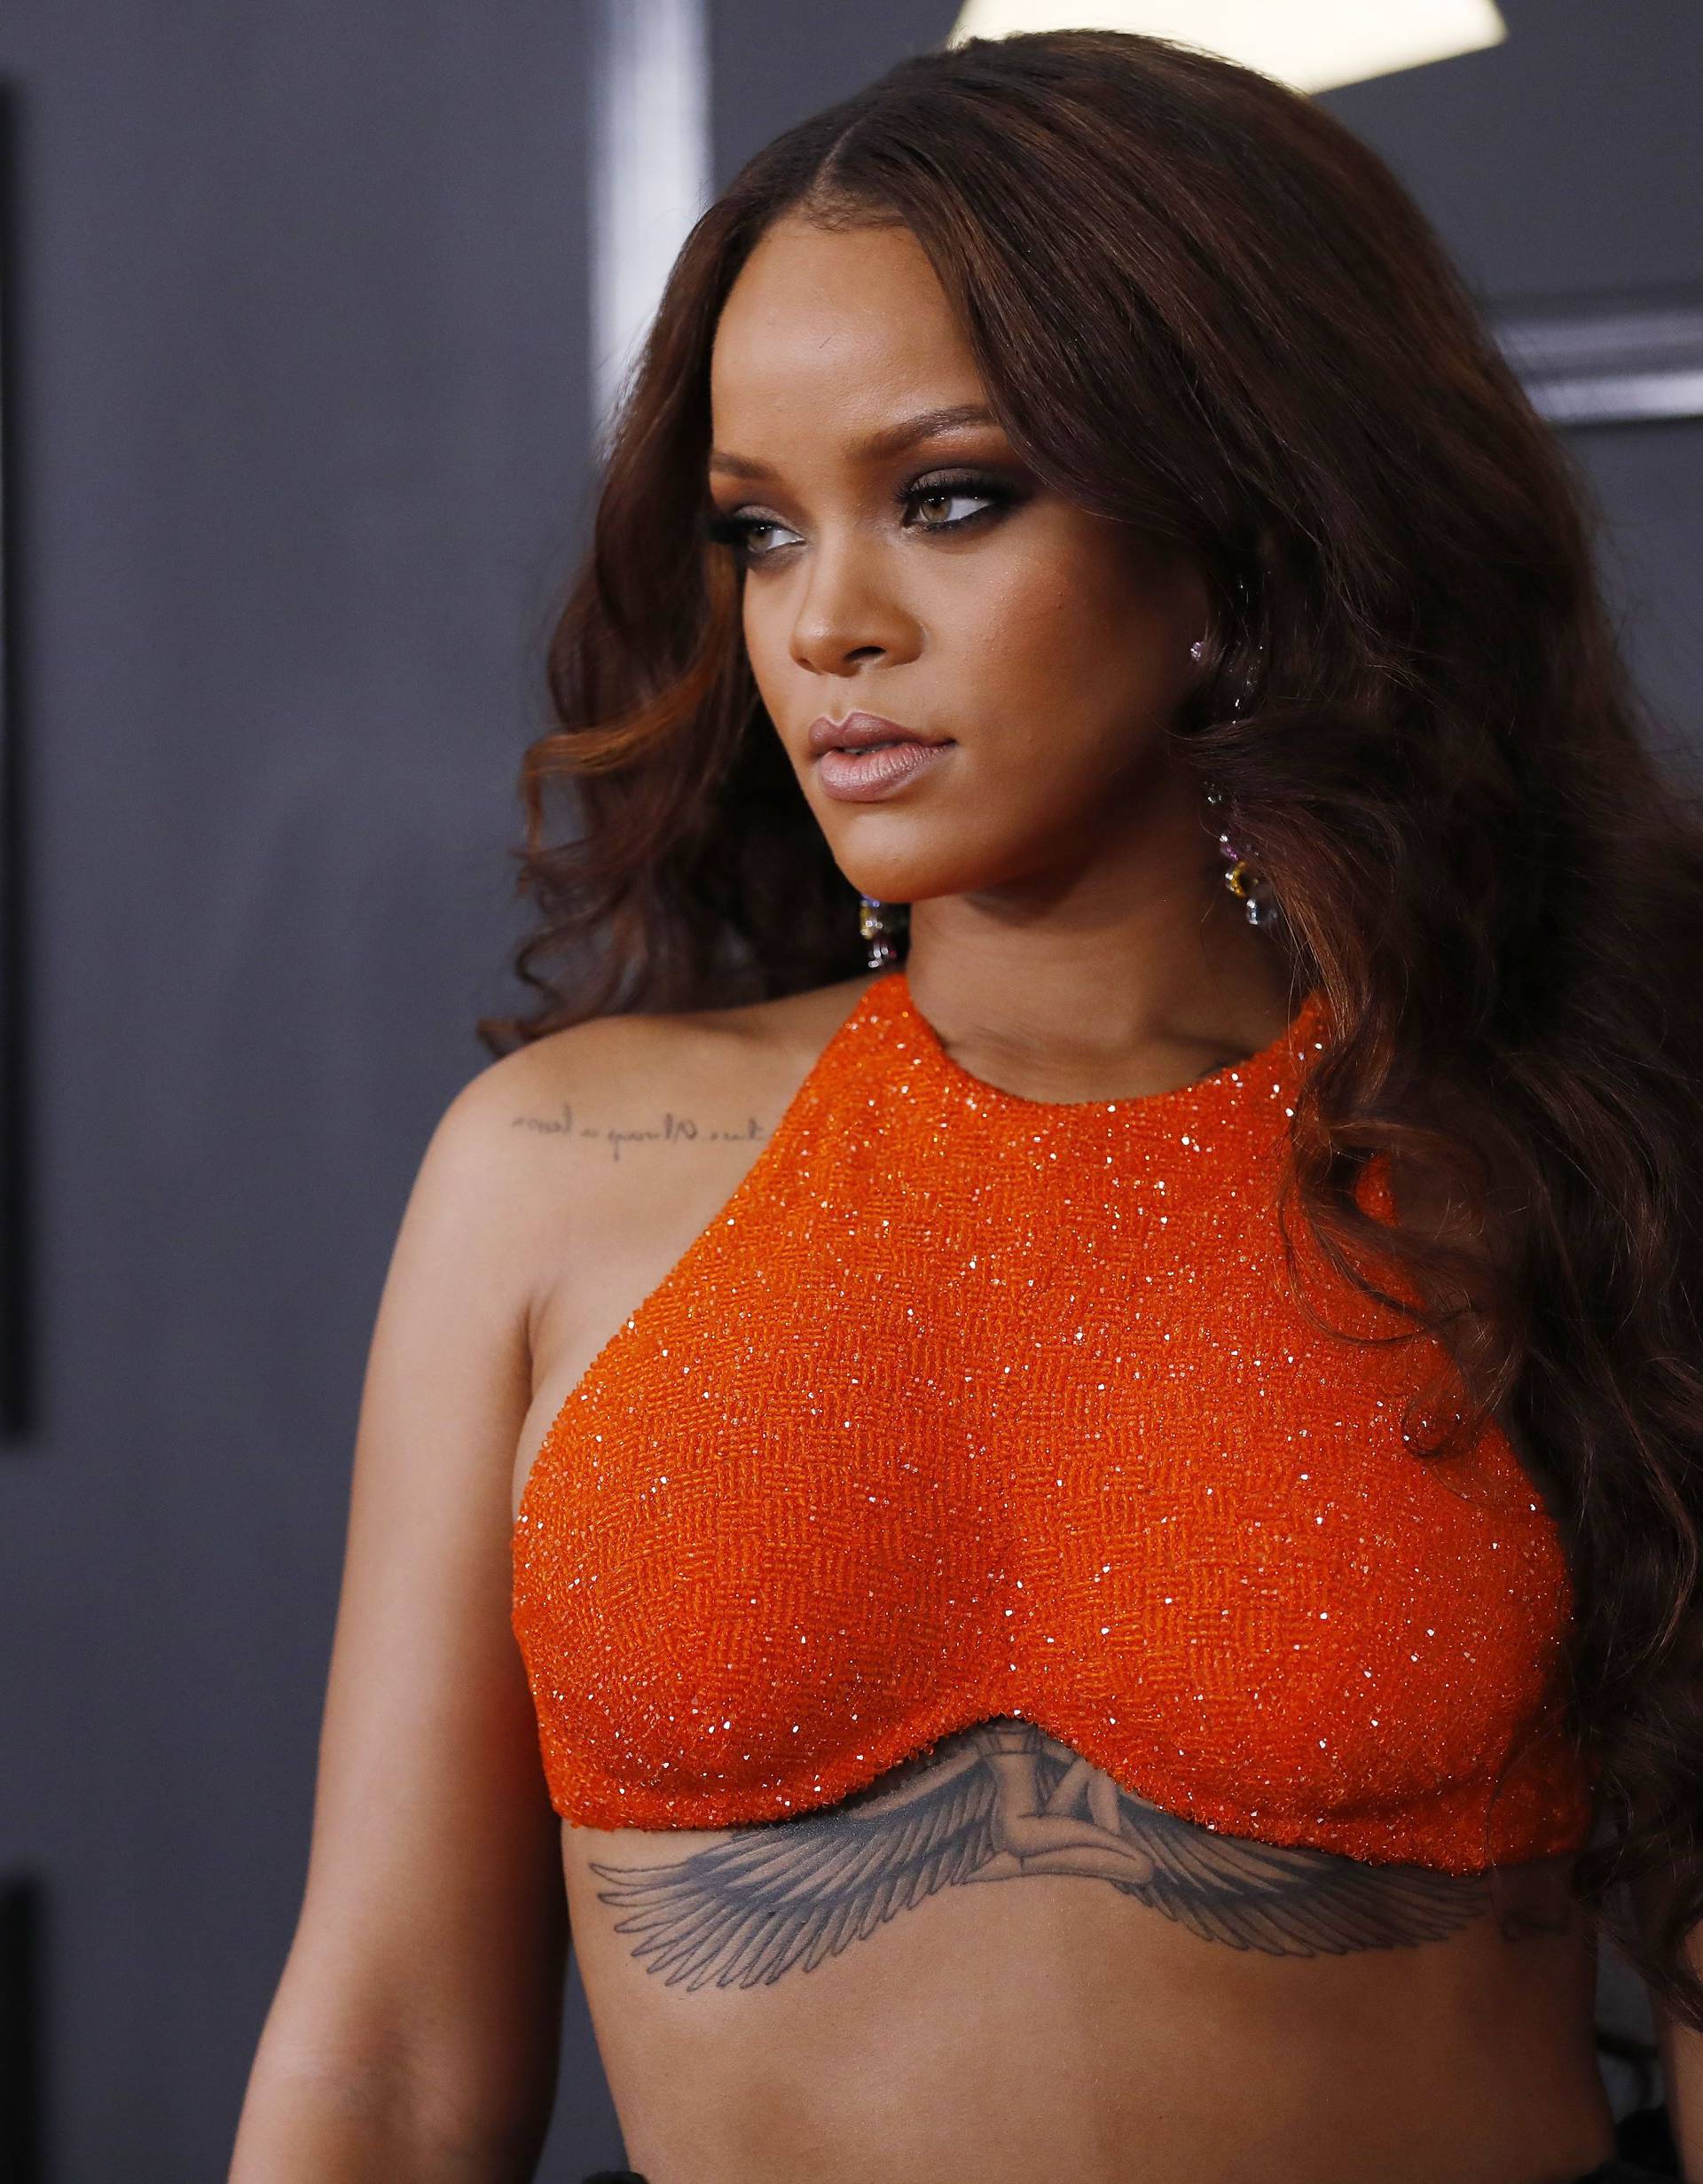 Rihanna arrives at the 59th Annual Grammy Awards in Los Angeles